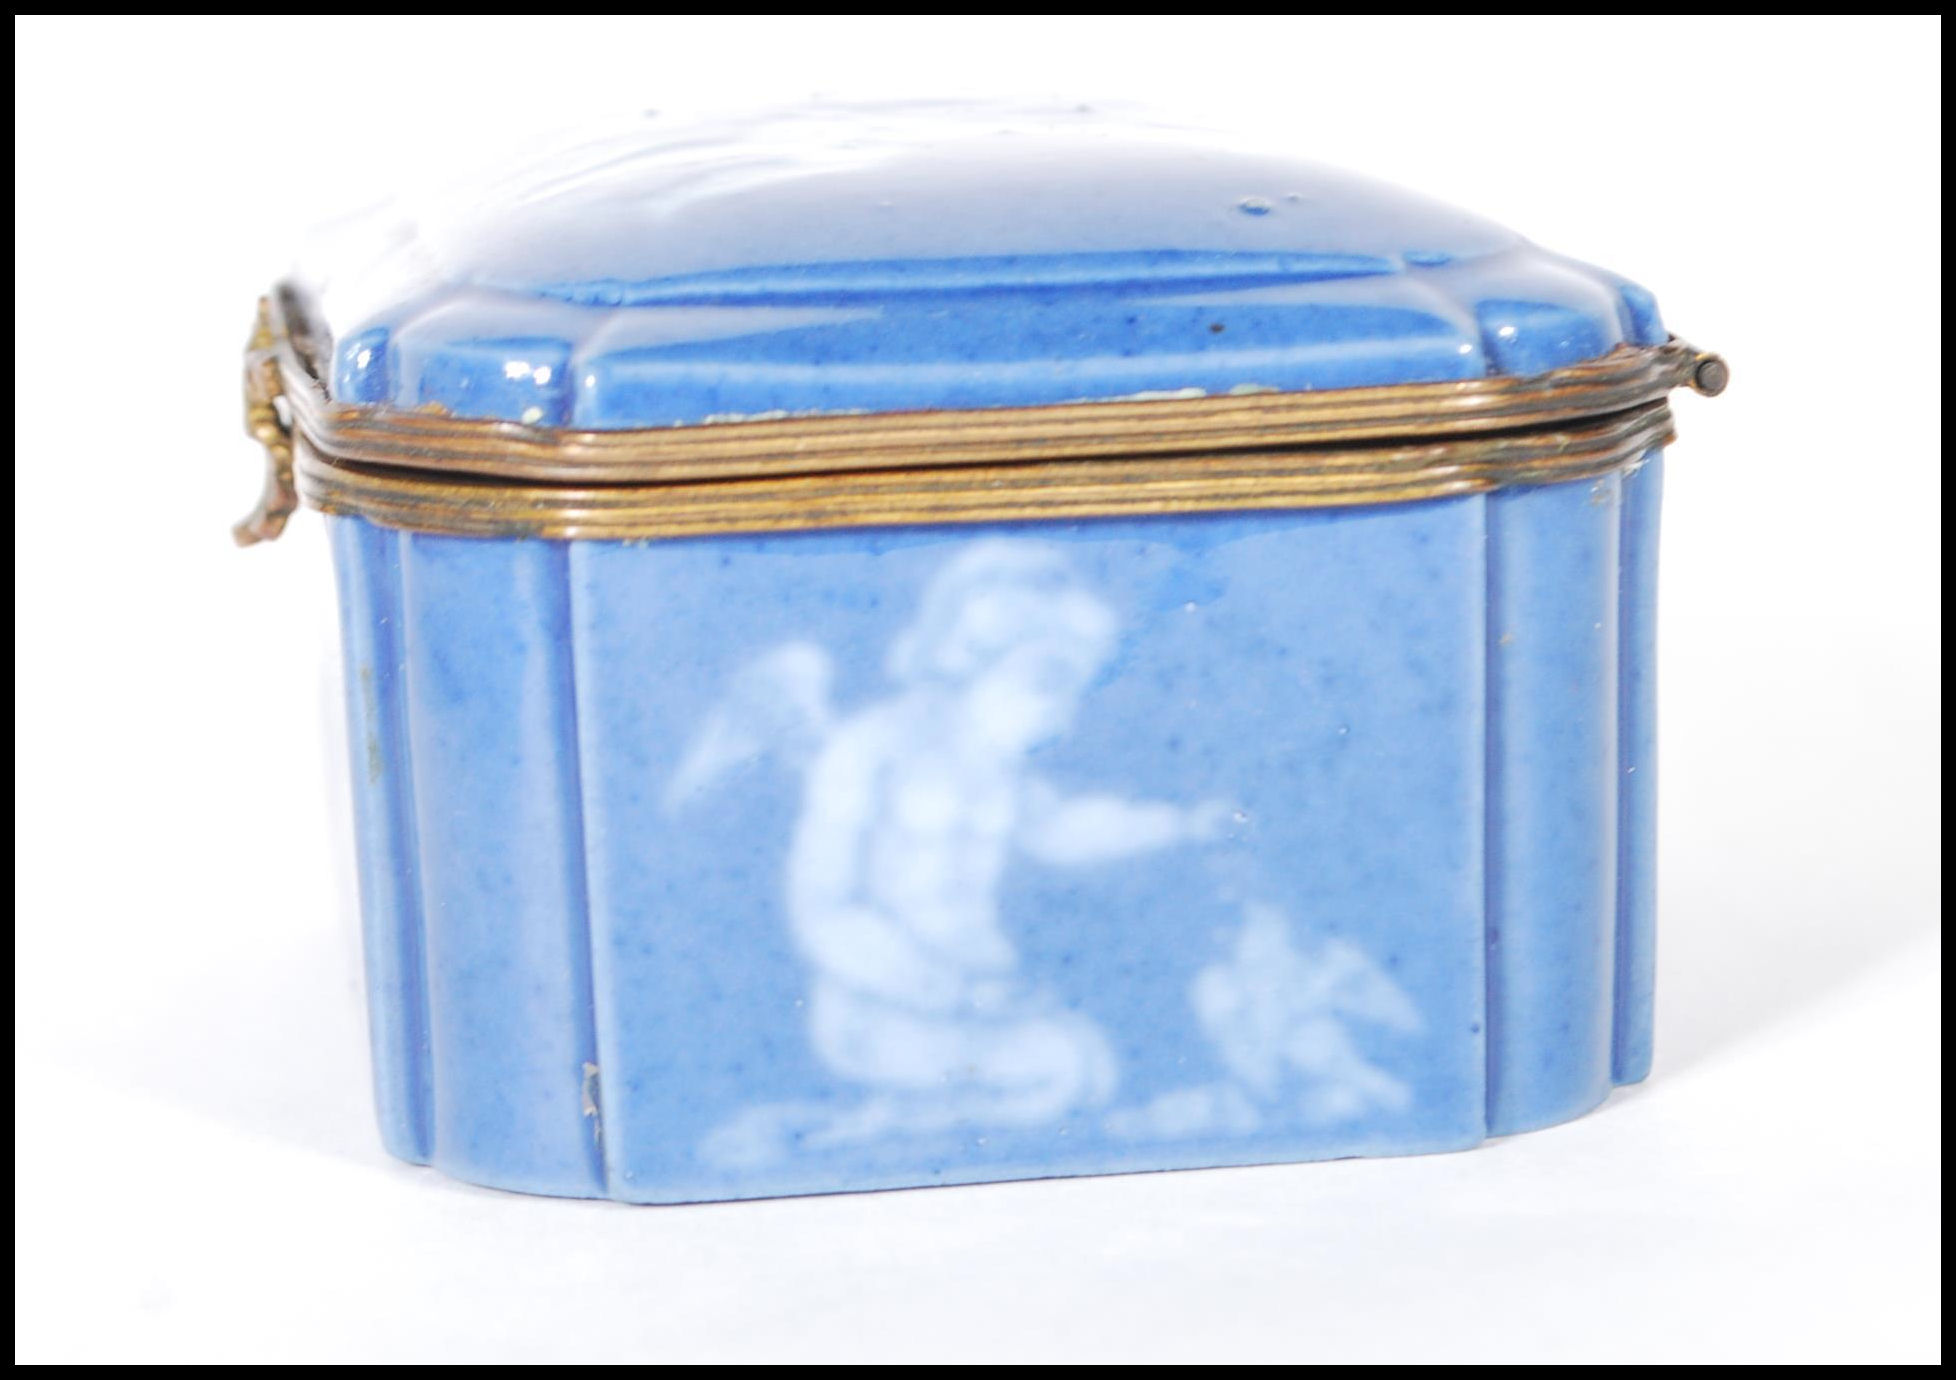 An early 20th Century continental German porcelain blue ceramic casket / trinket box with a pat - Image 6 of 9